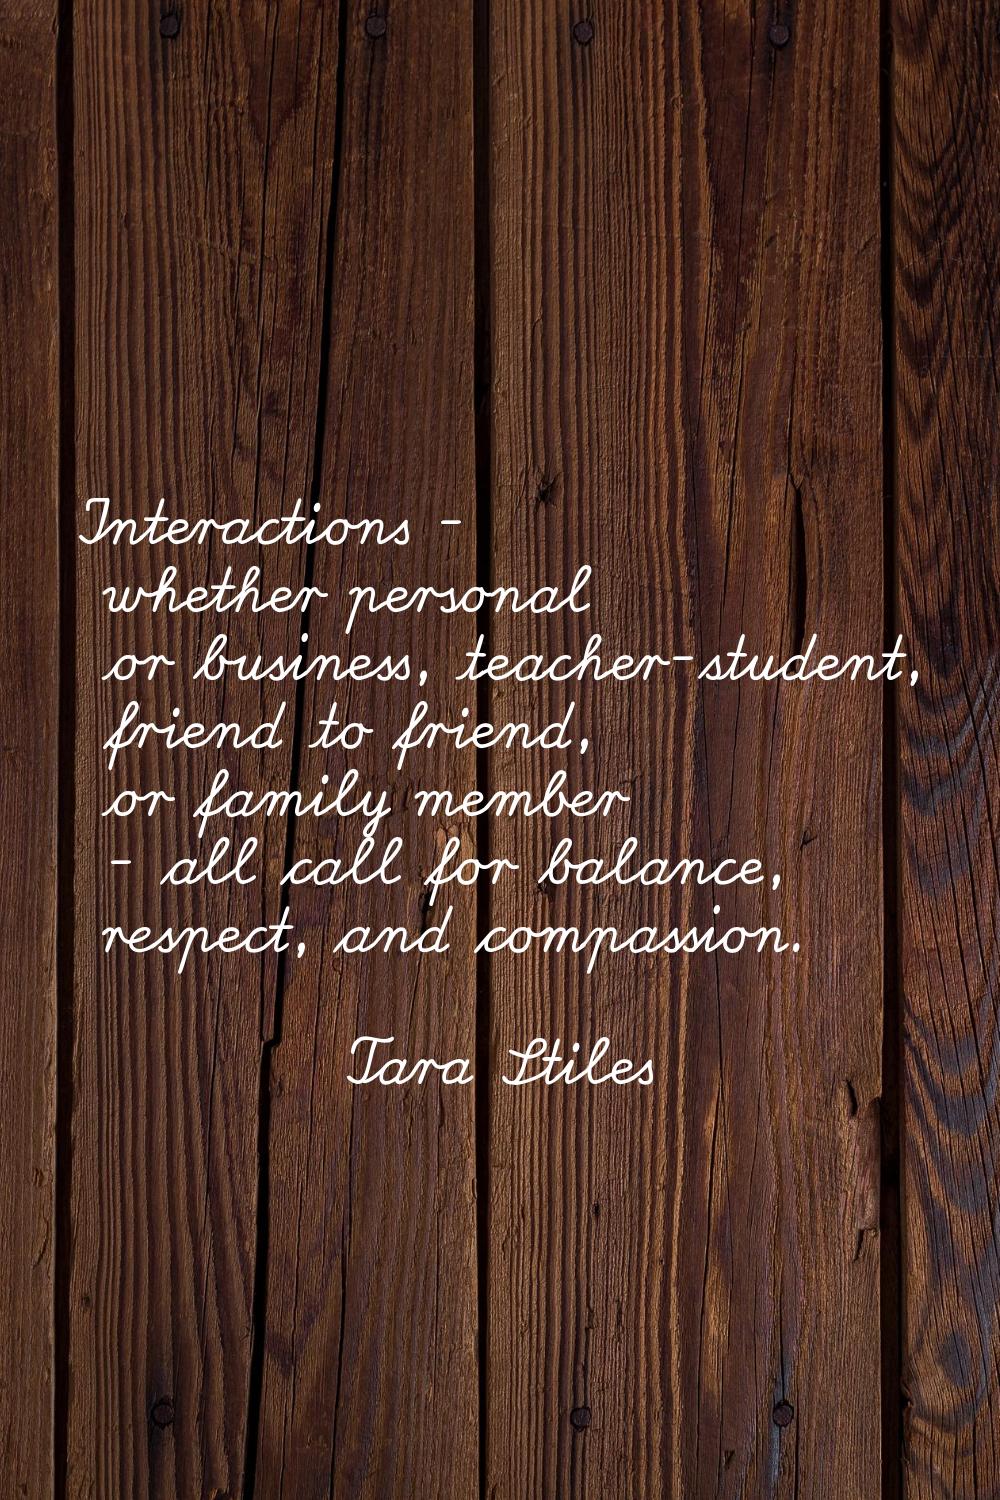 Interactions - whether personal or business, teacher-student, friend to friend, or family member - 